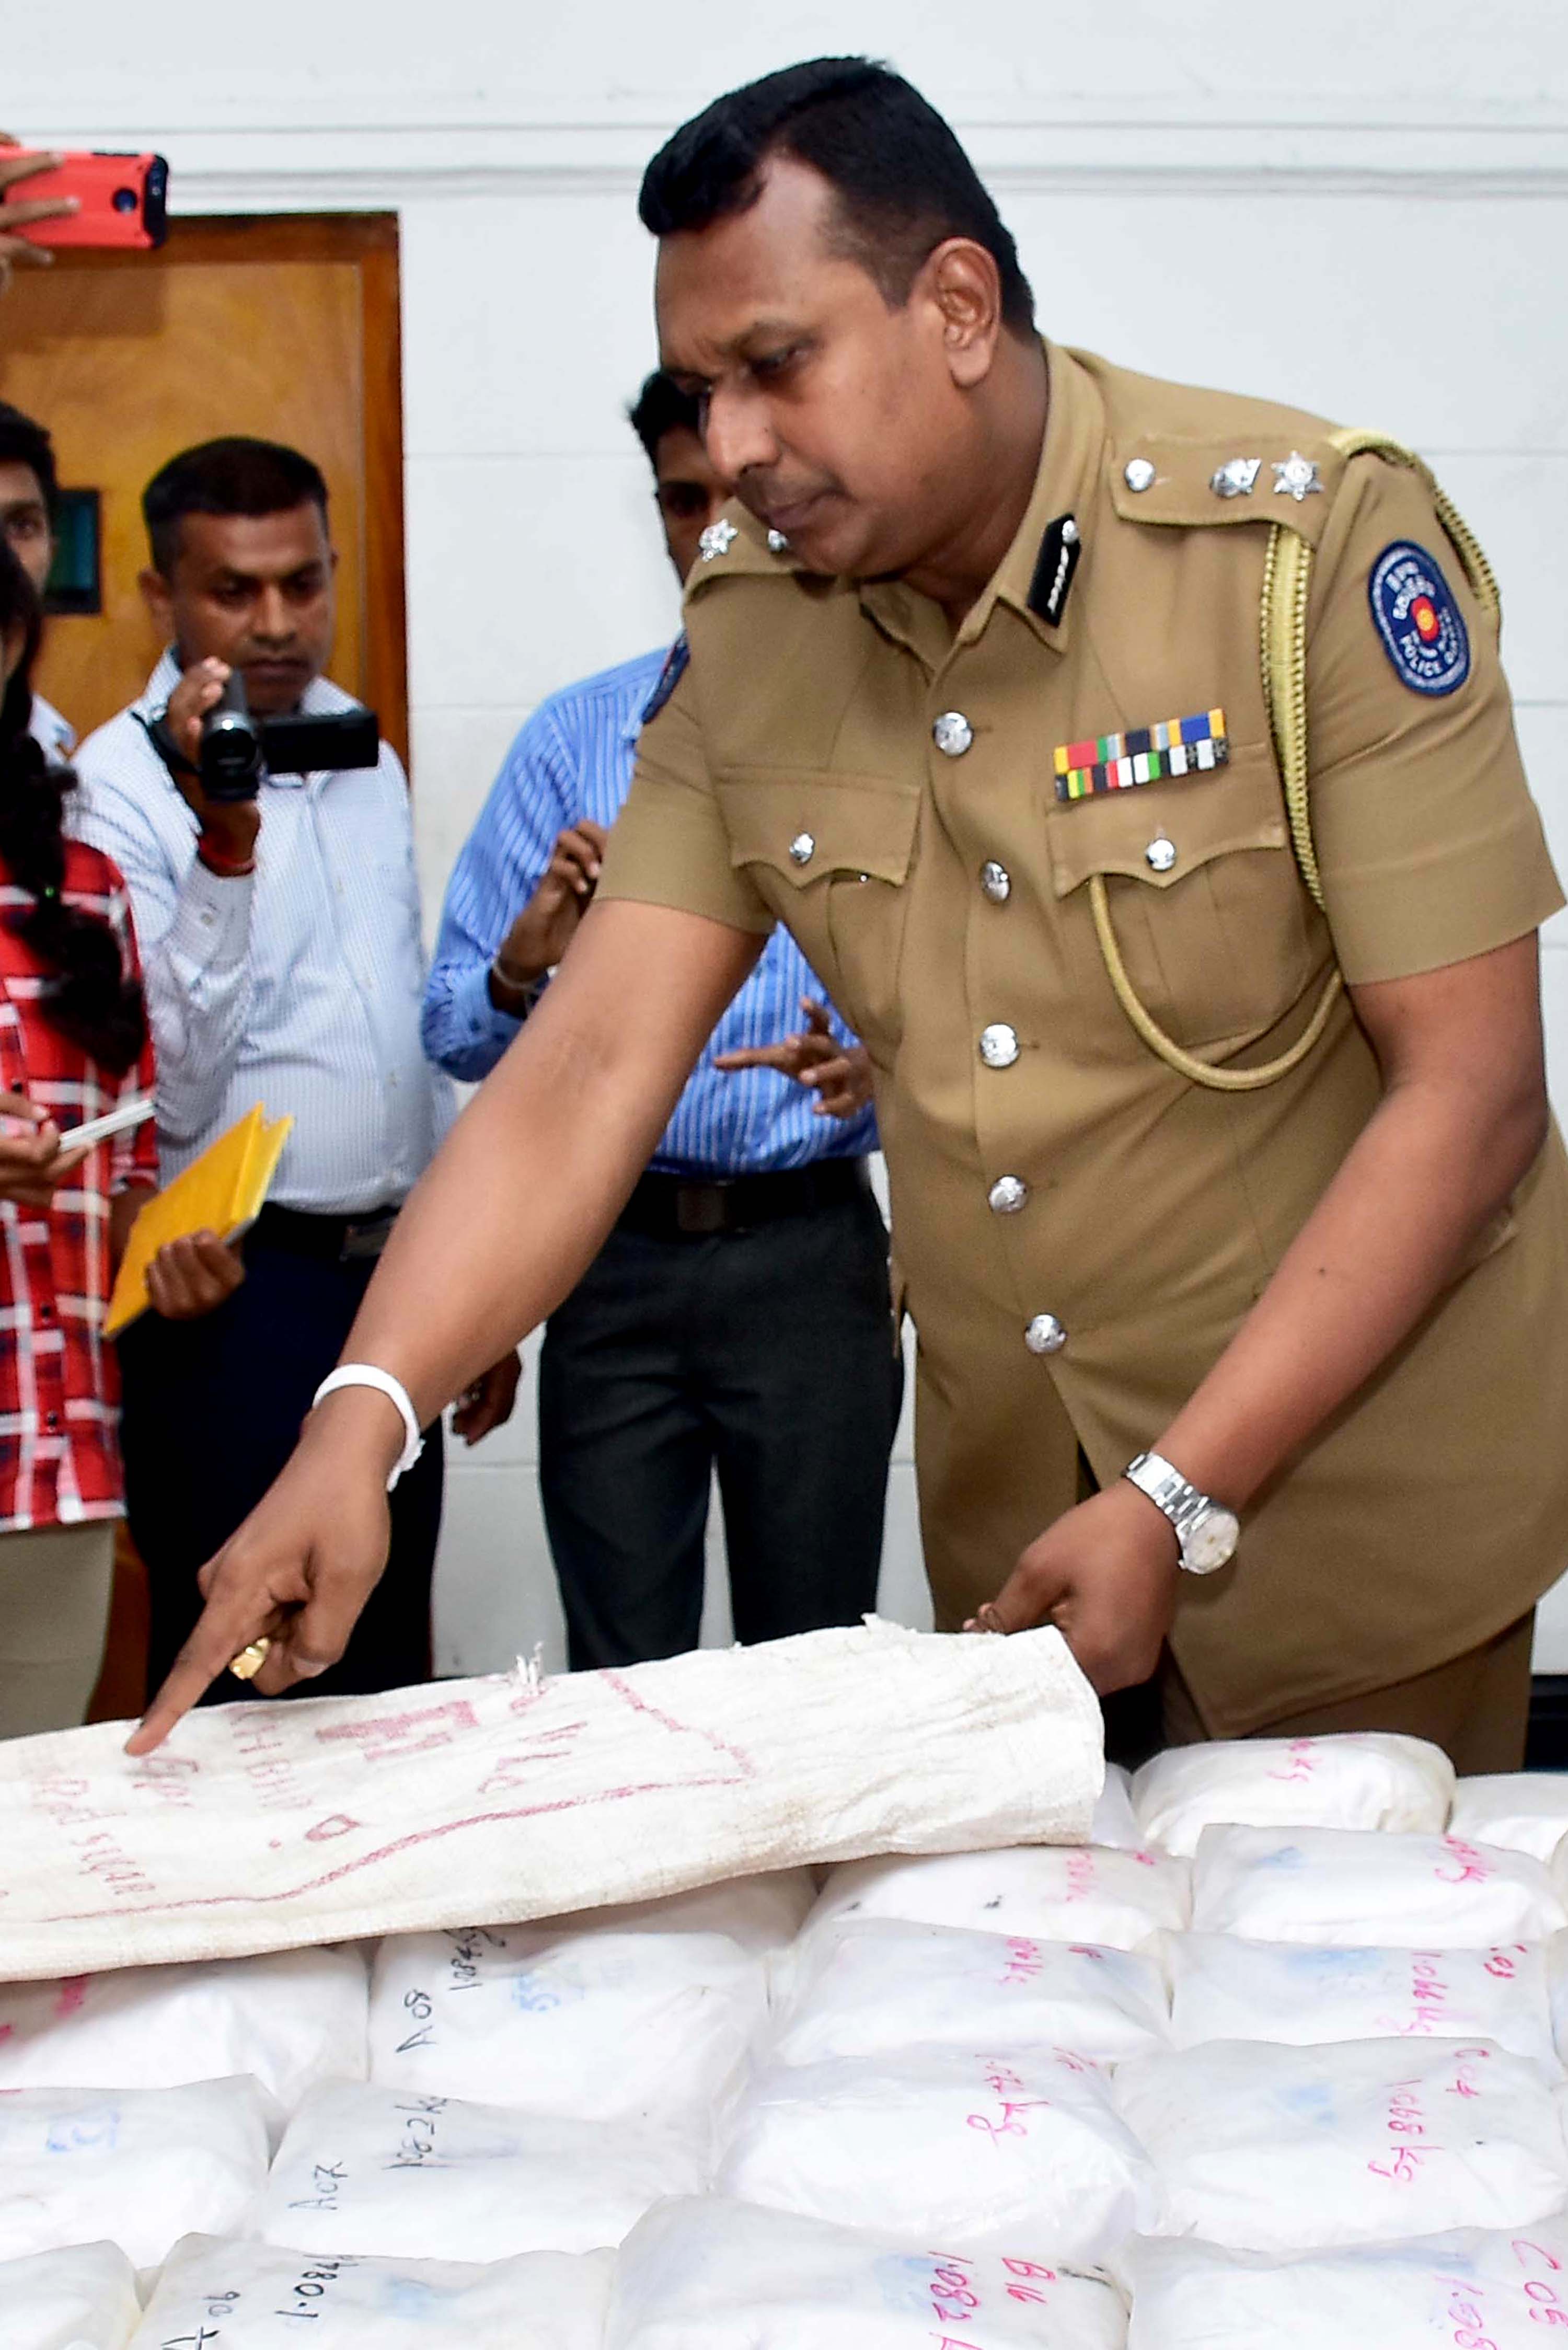 2nd largest heroin haul seized in SL...